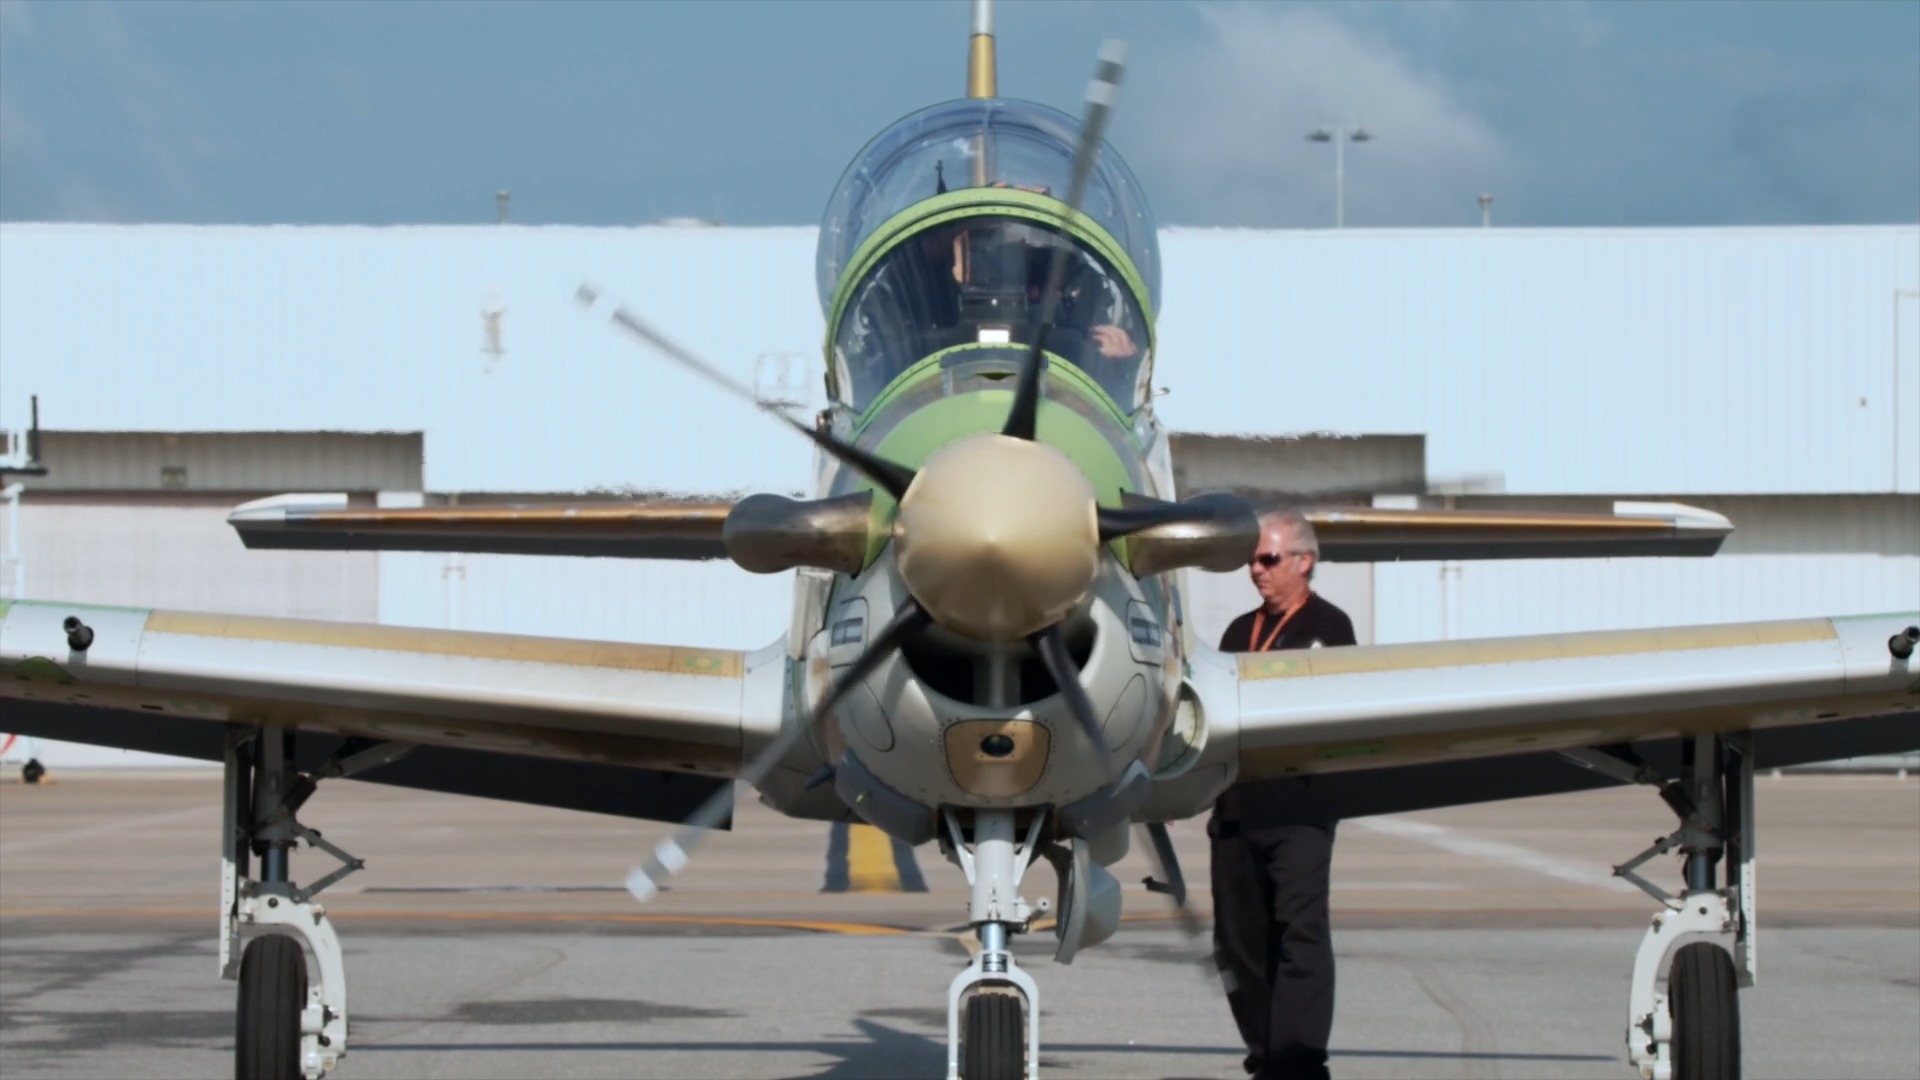 First Nigerian Air Force A-29 Super Tucano Light Attack Aircraft Successfully Completes Inaugural Flight